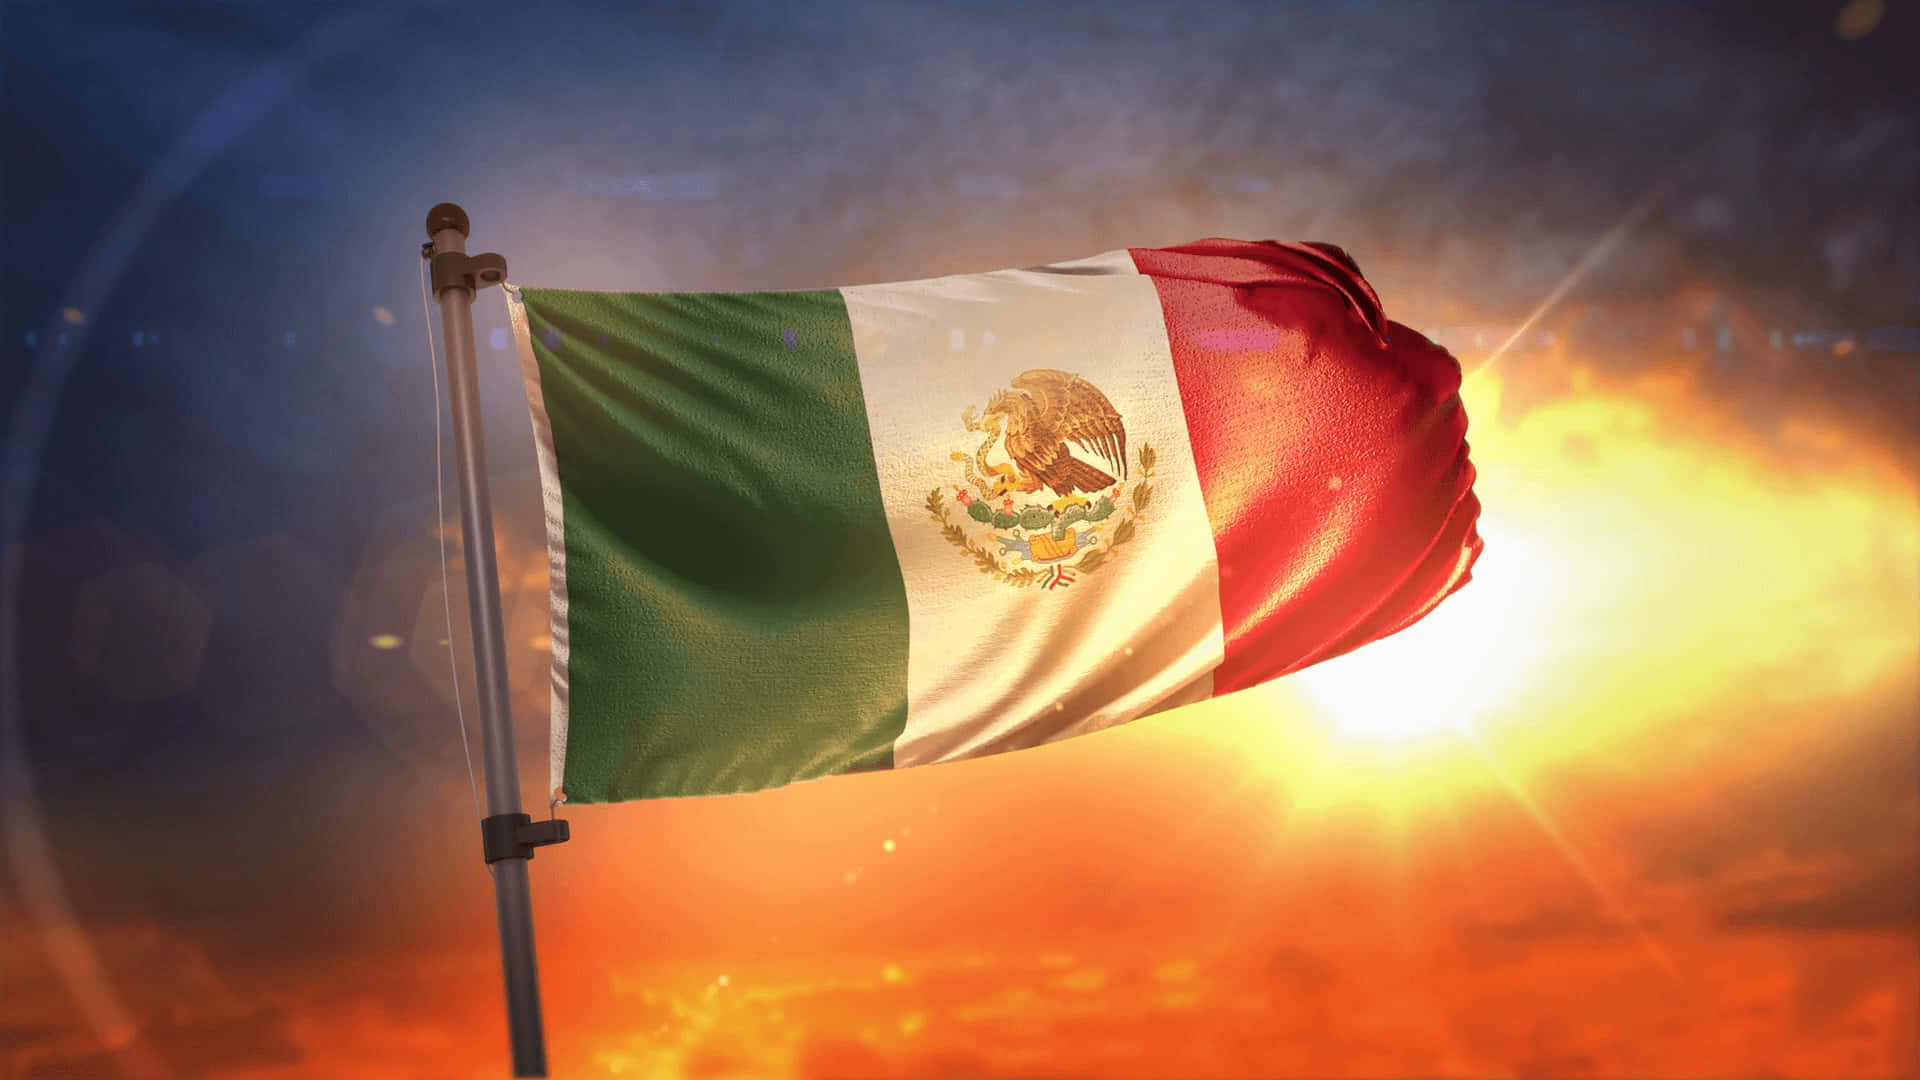 Mexico Flag Flying In The Wind With A Fire